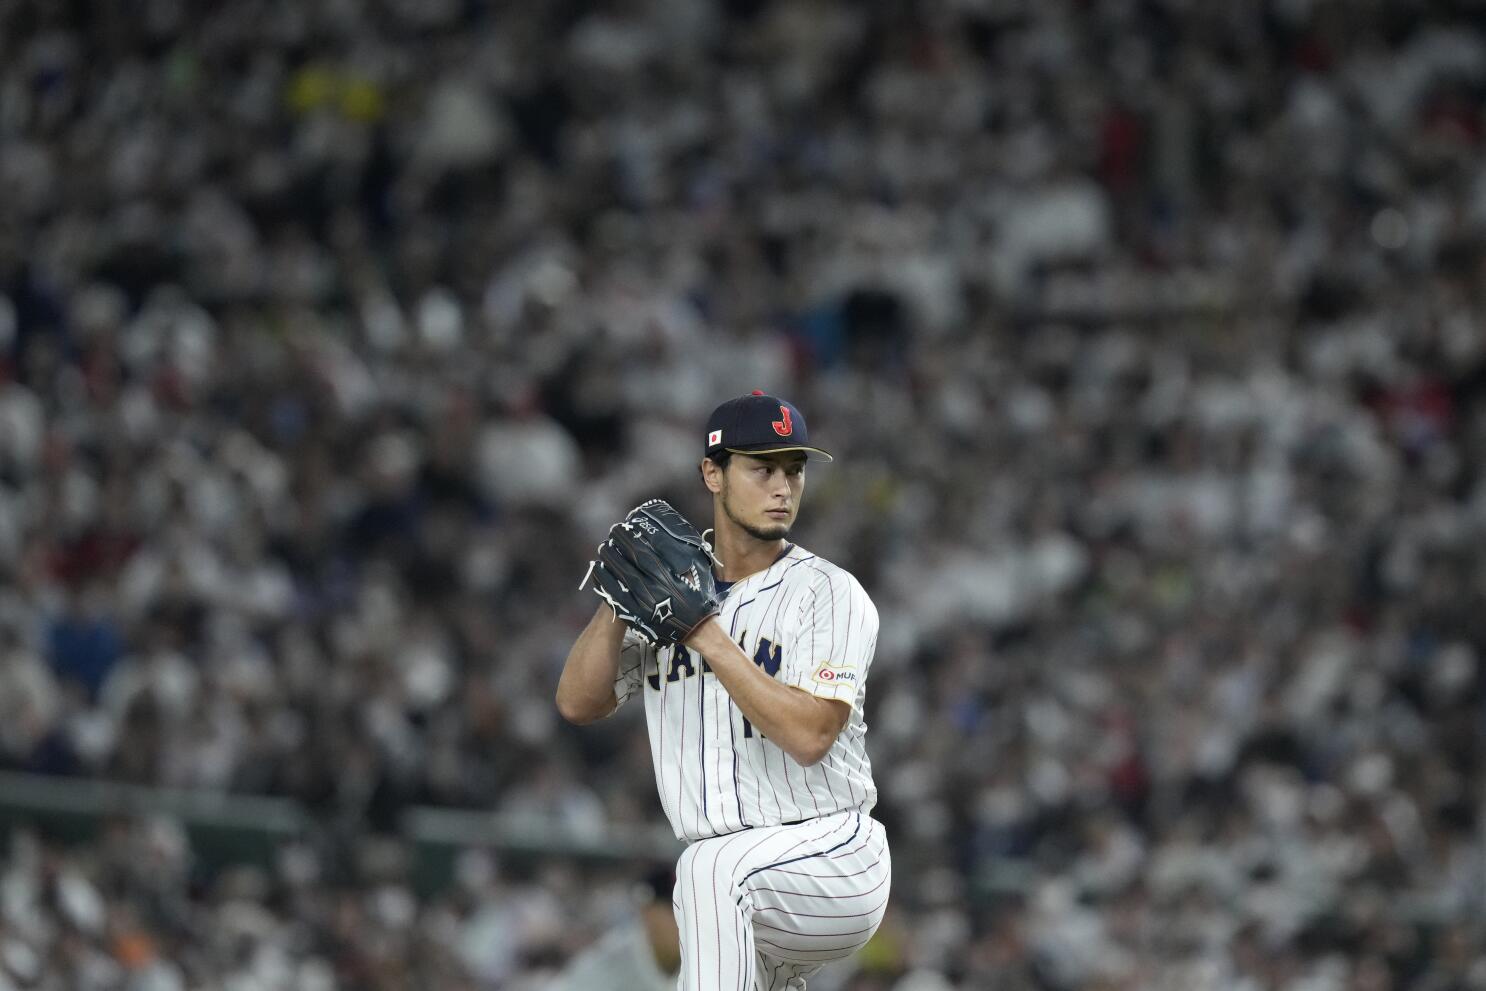 Texas will try to sign Japan's top pitcher Yu Darvish